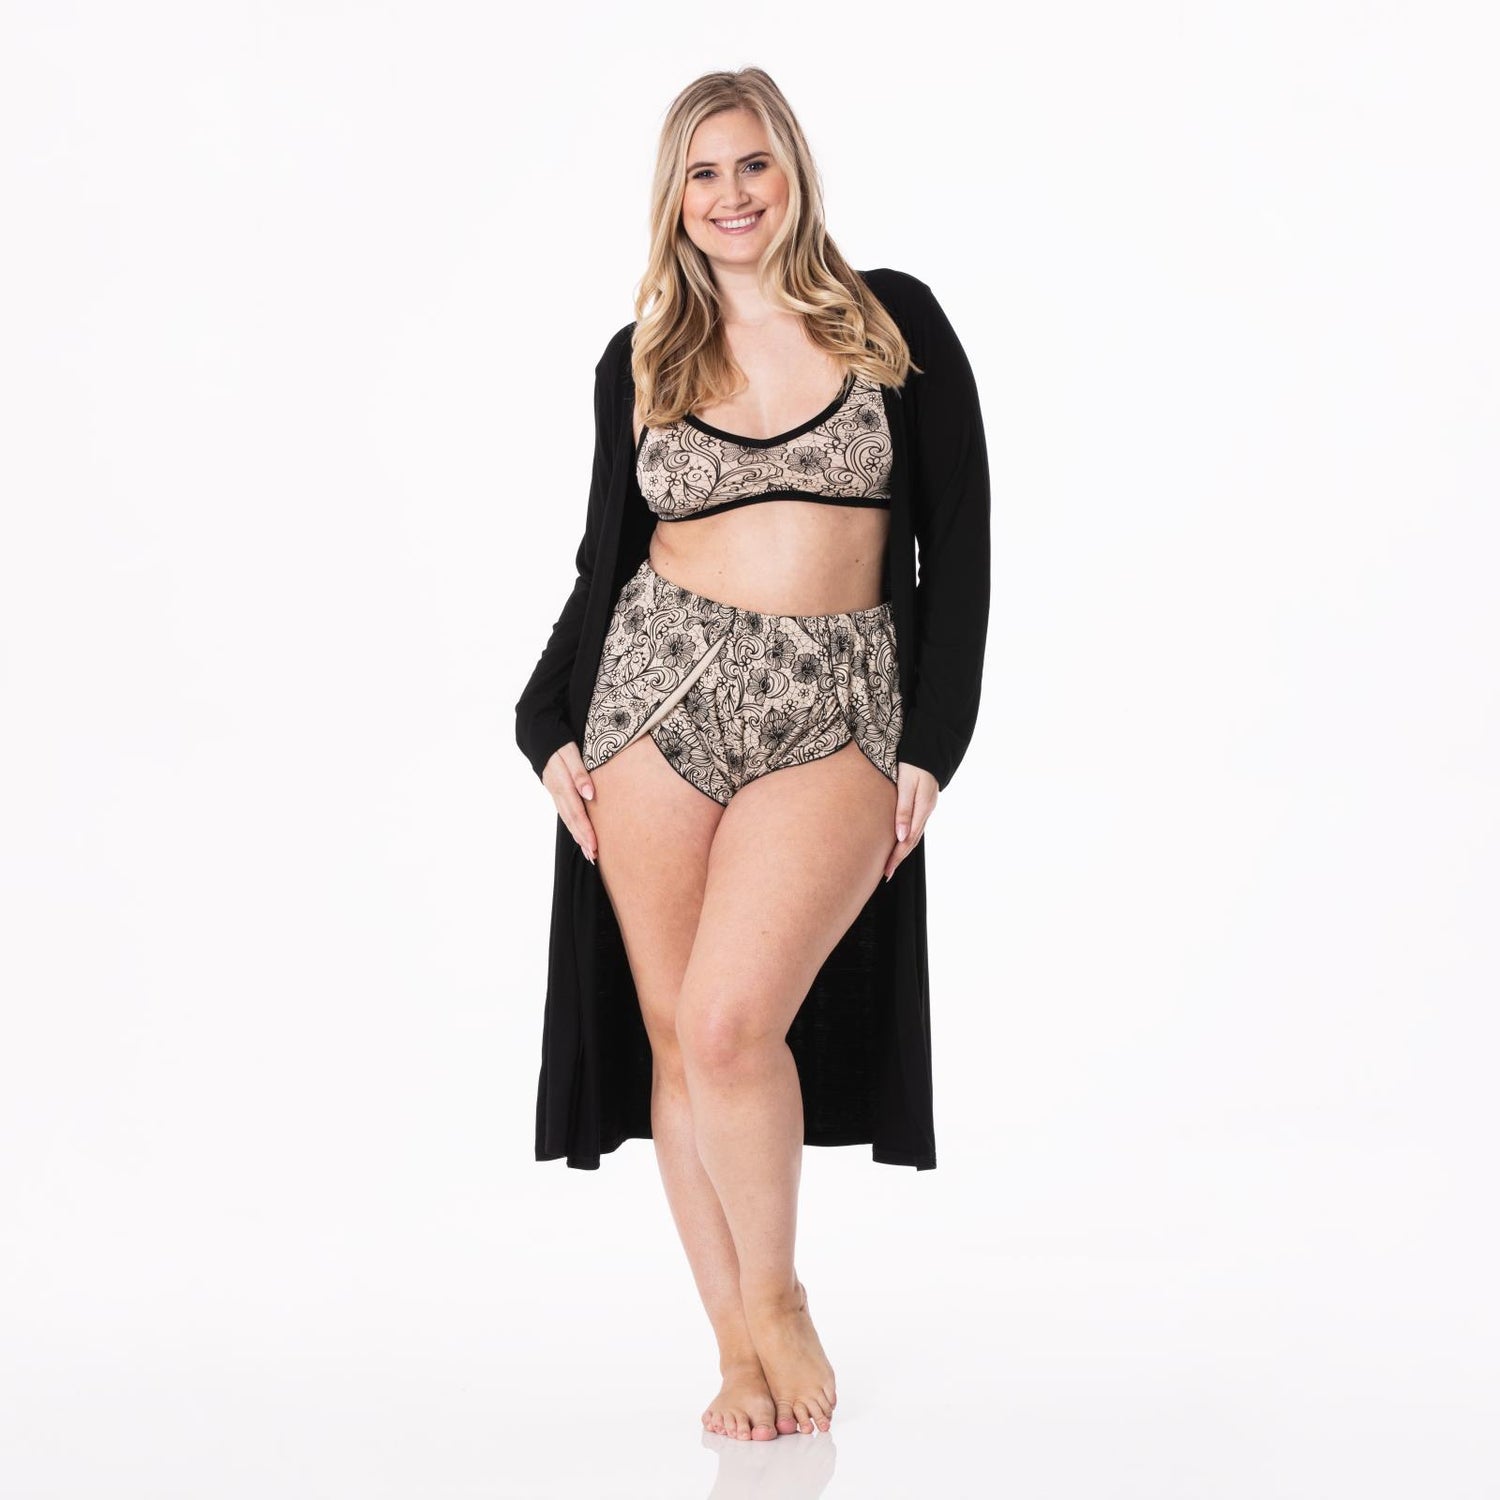 Women's Print Sleeping Bra, Tulip Shorts and Duster Robe Set in Burlap Lace